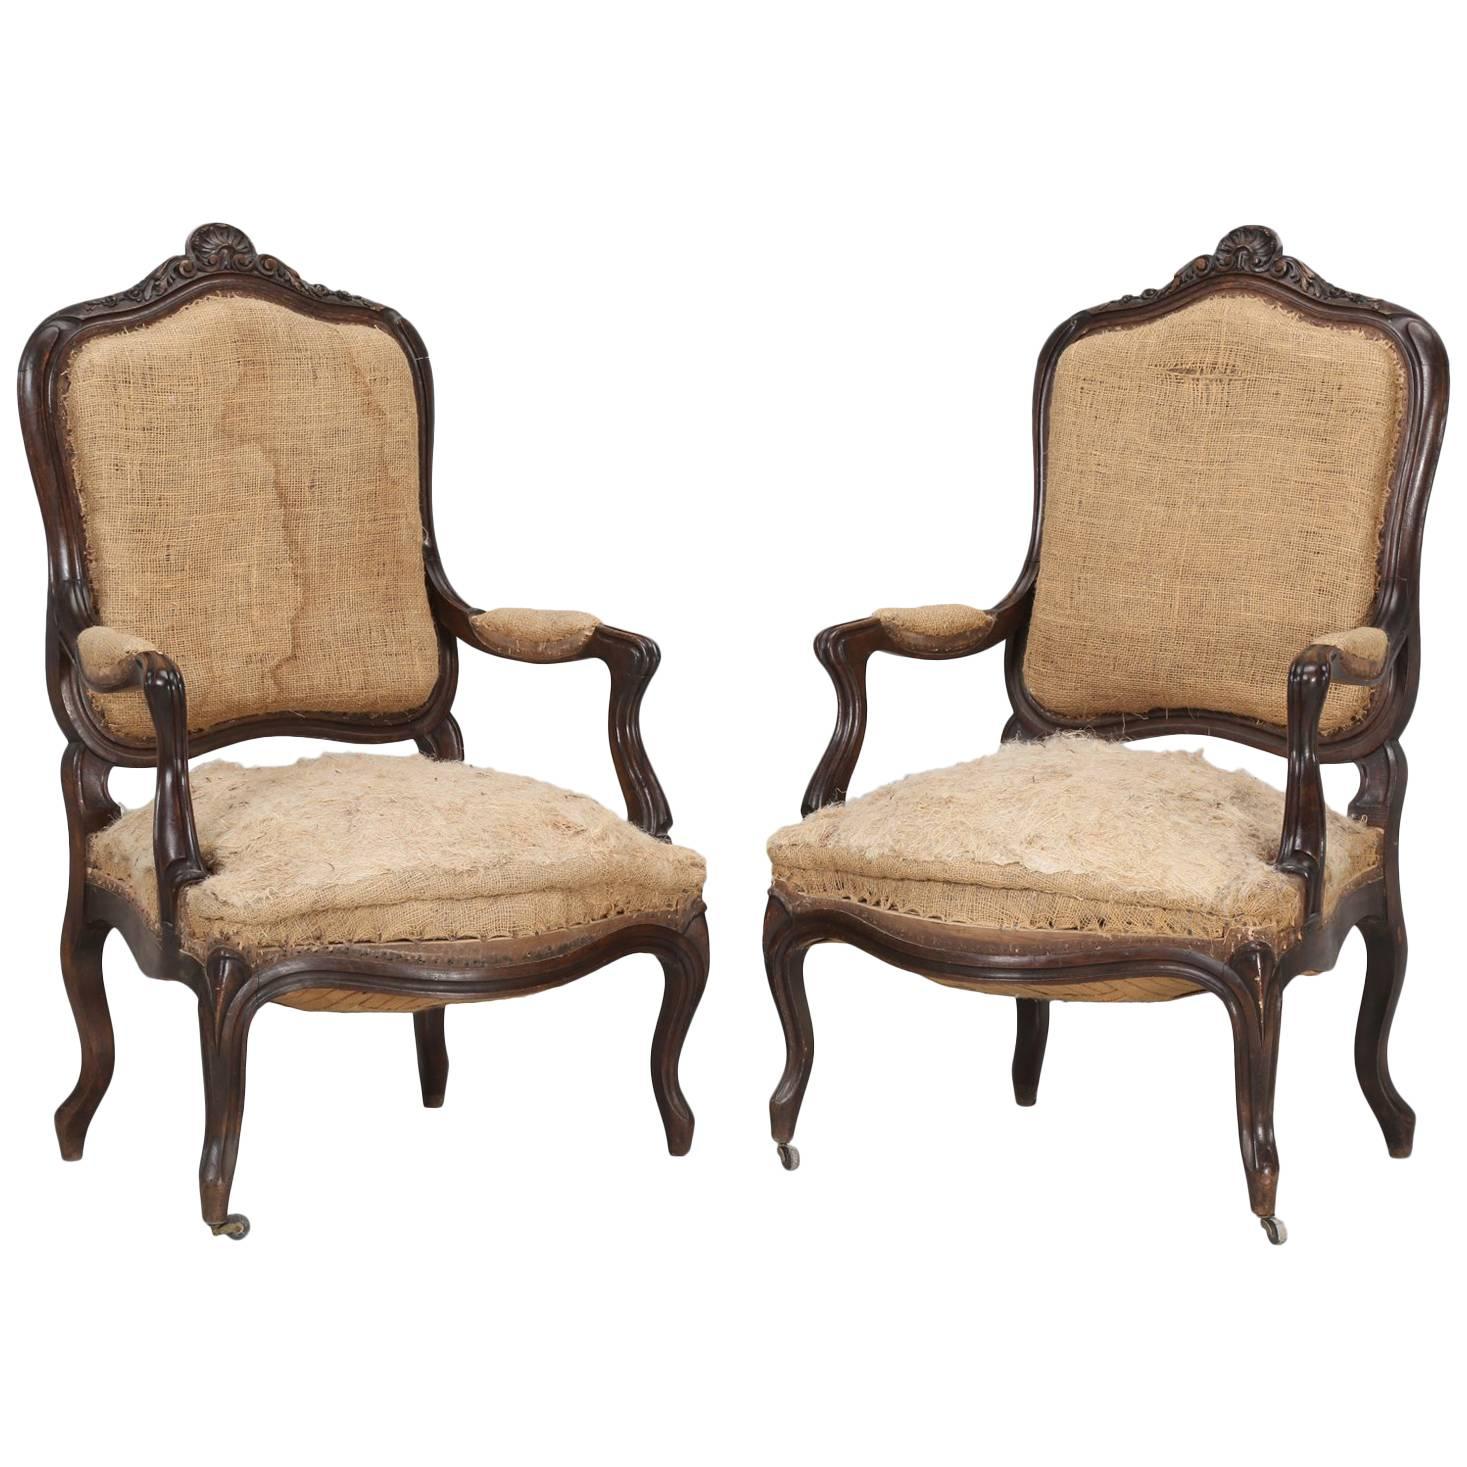 Pair of Antique French Carved Parlor or Living Room Armchairs For Sale